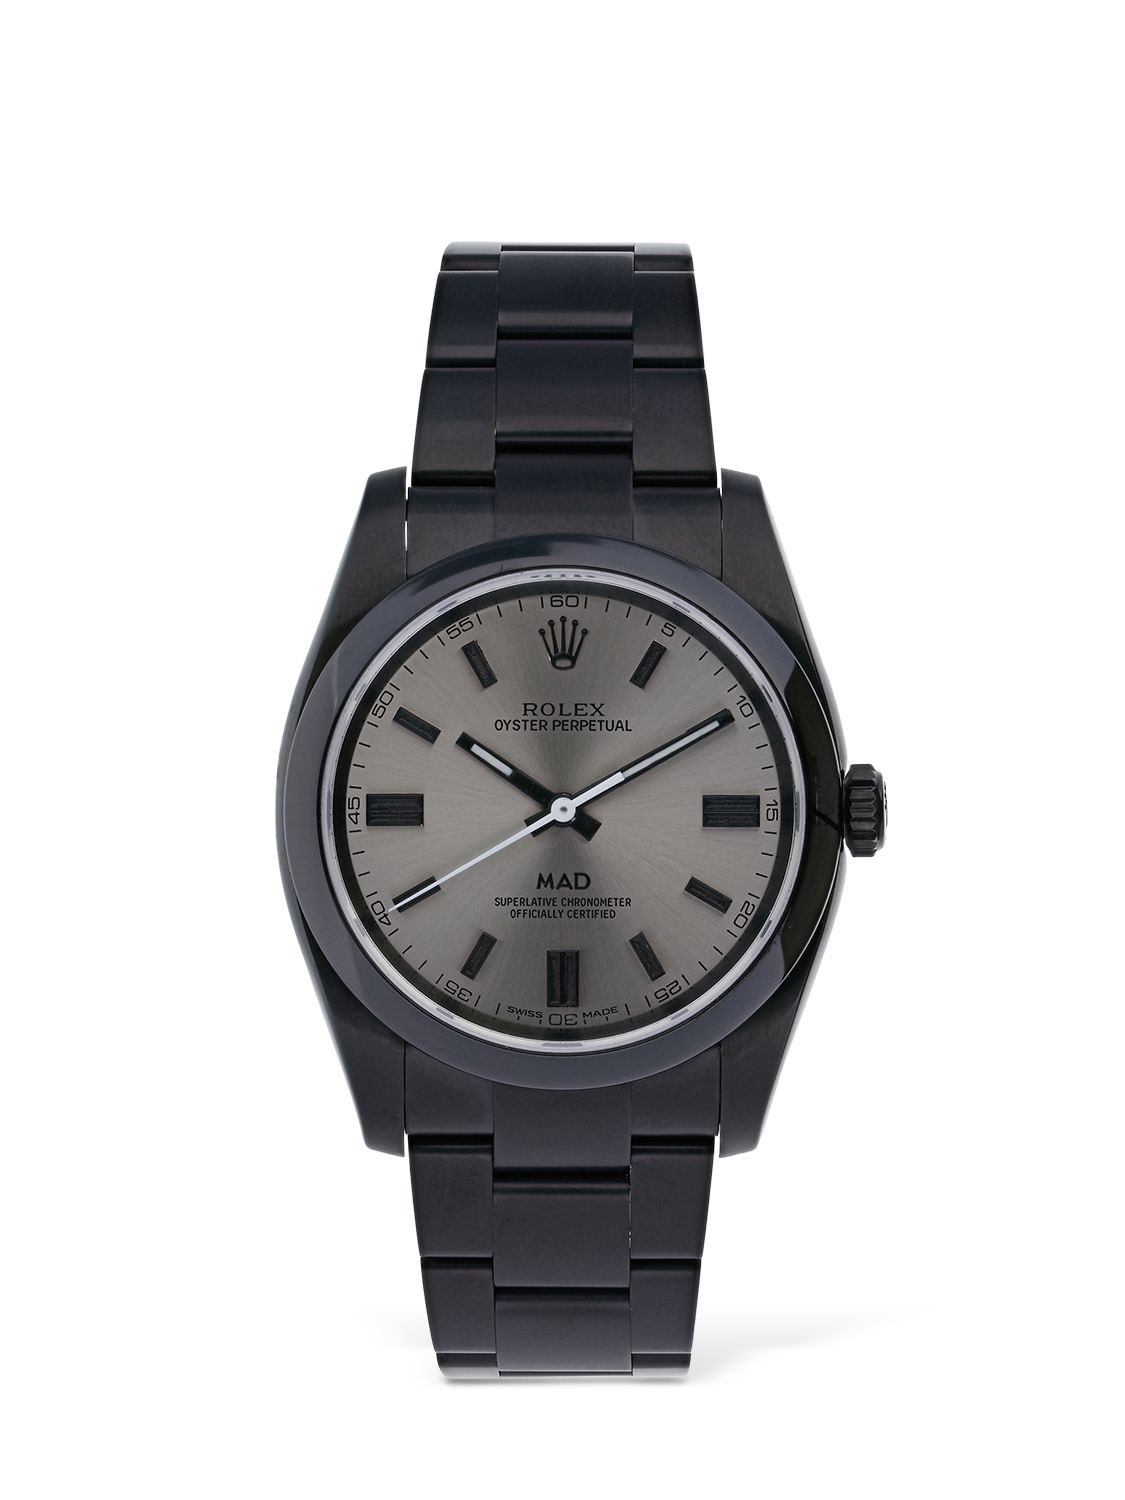 Montre  rolex Oyster Perpetual  36 Mm